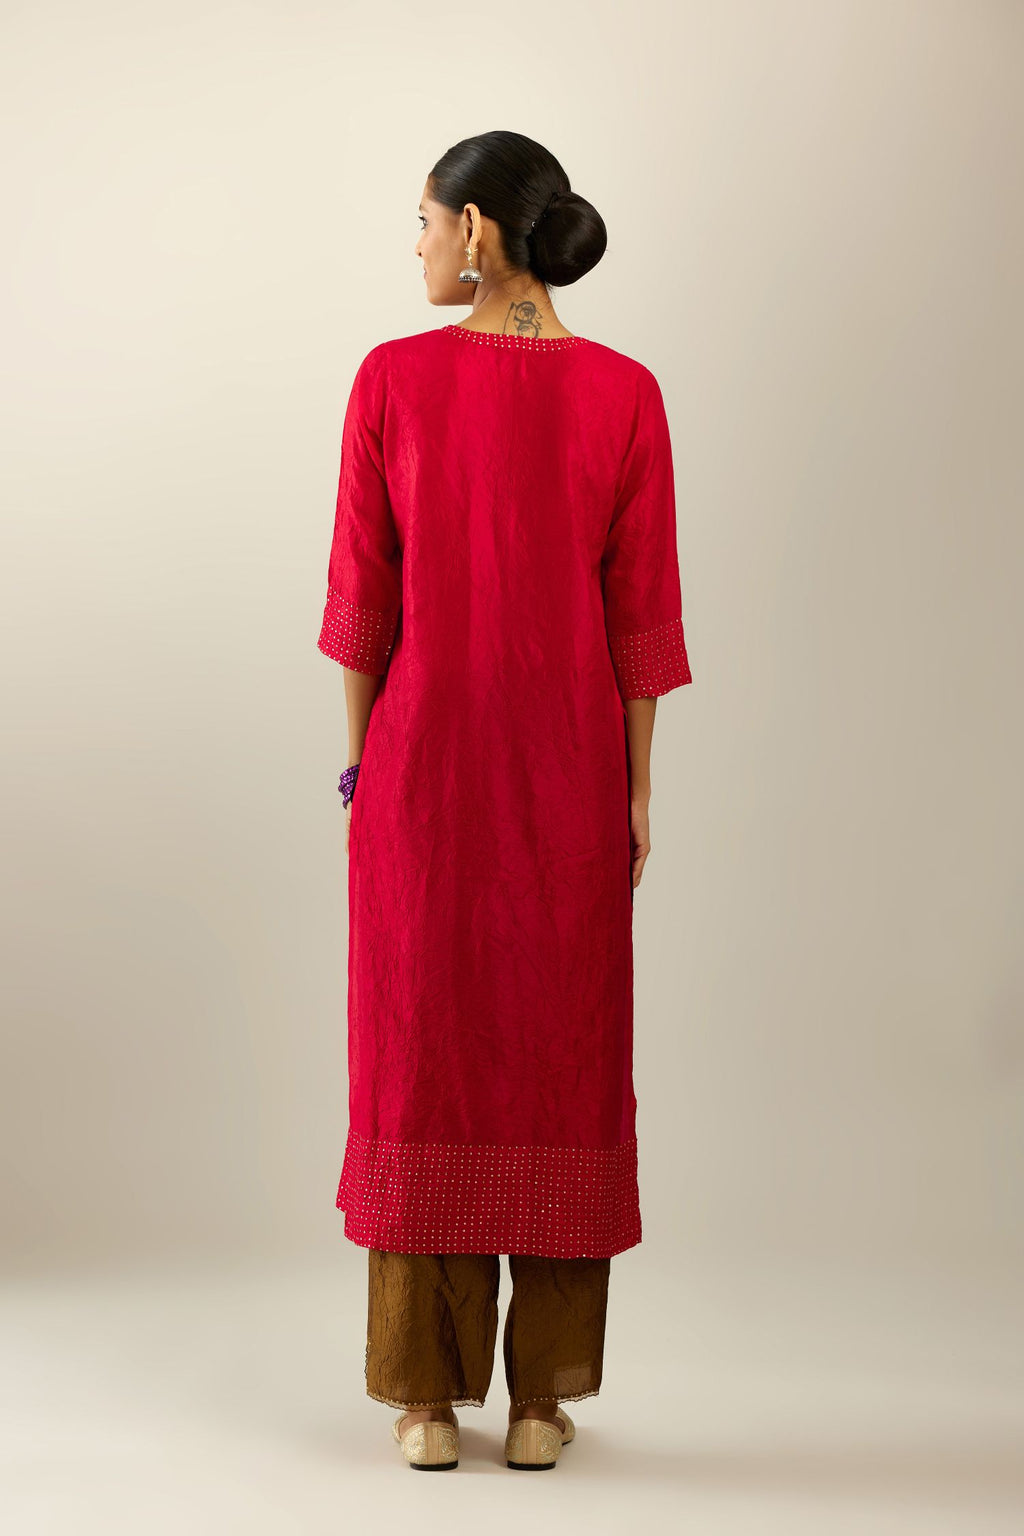 Red silk hand crushed kurta set with concealed button placket neckline, highlighted with gold sequins.